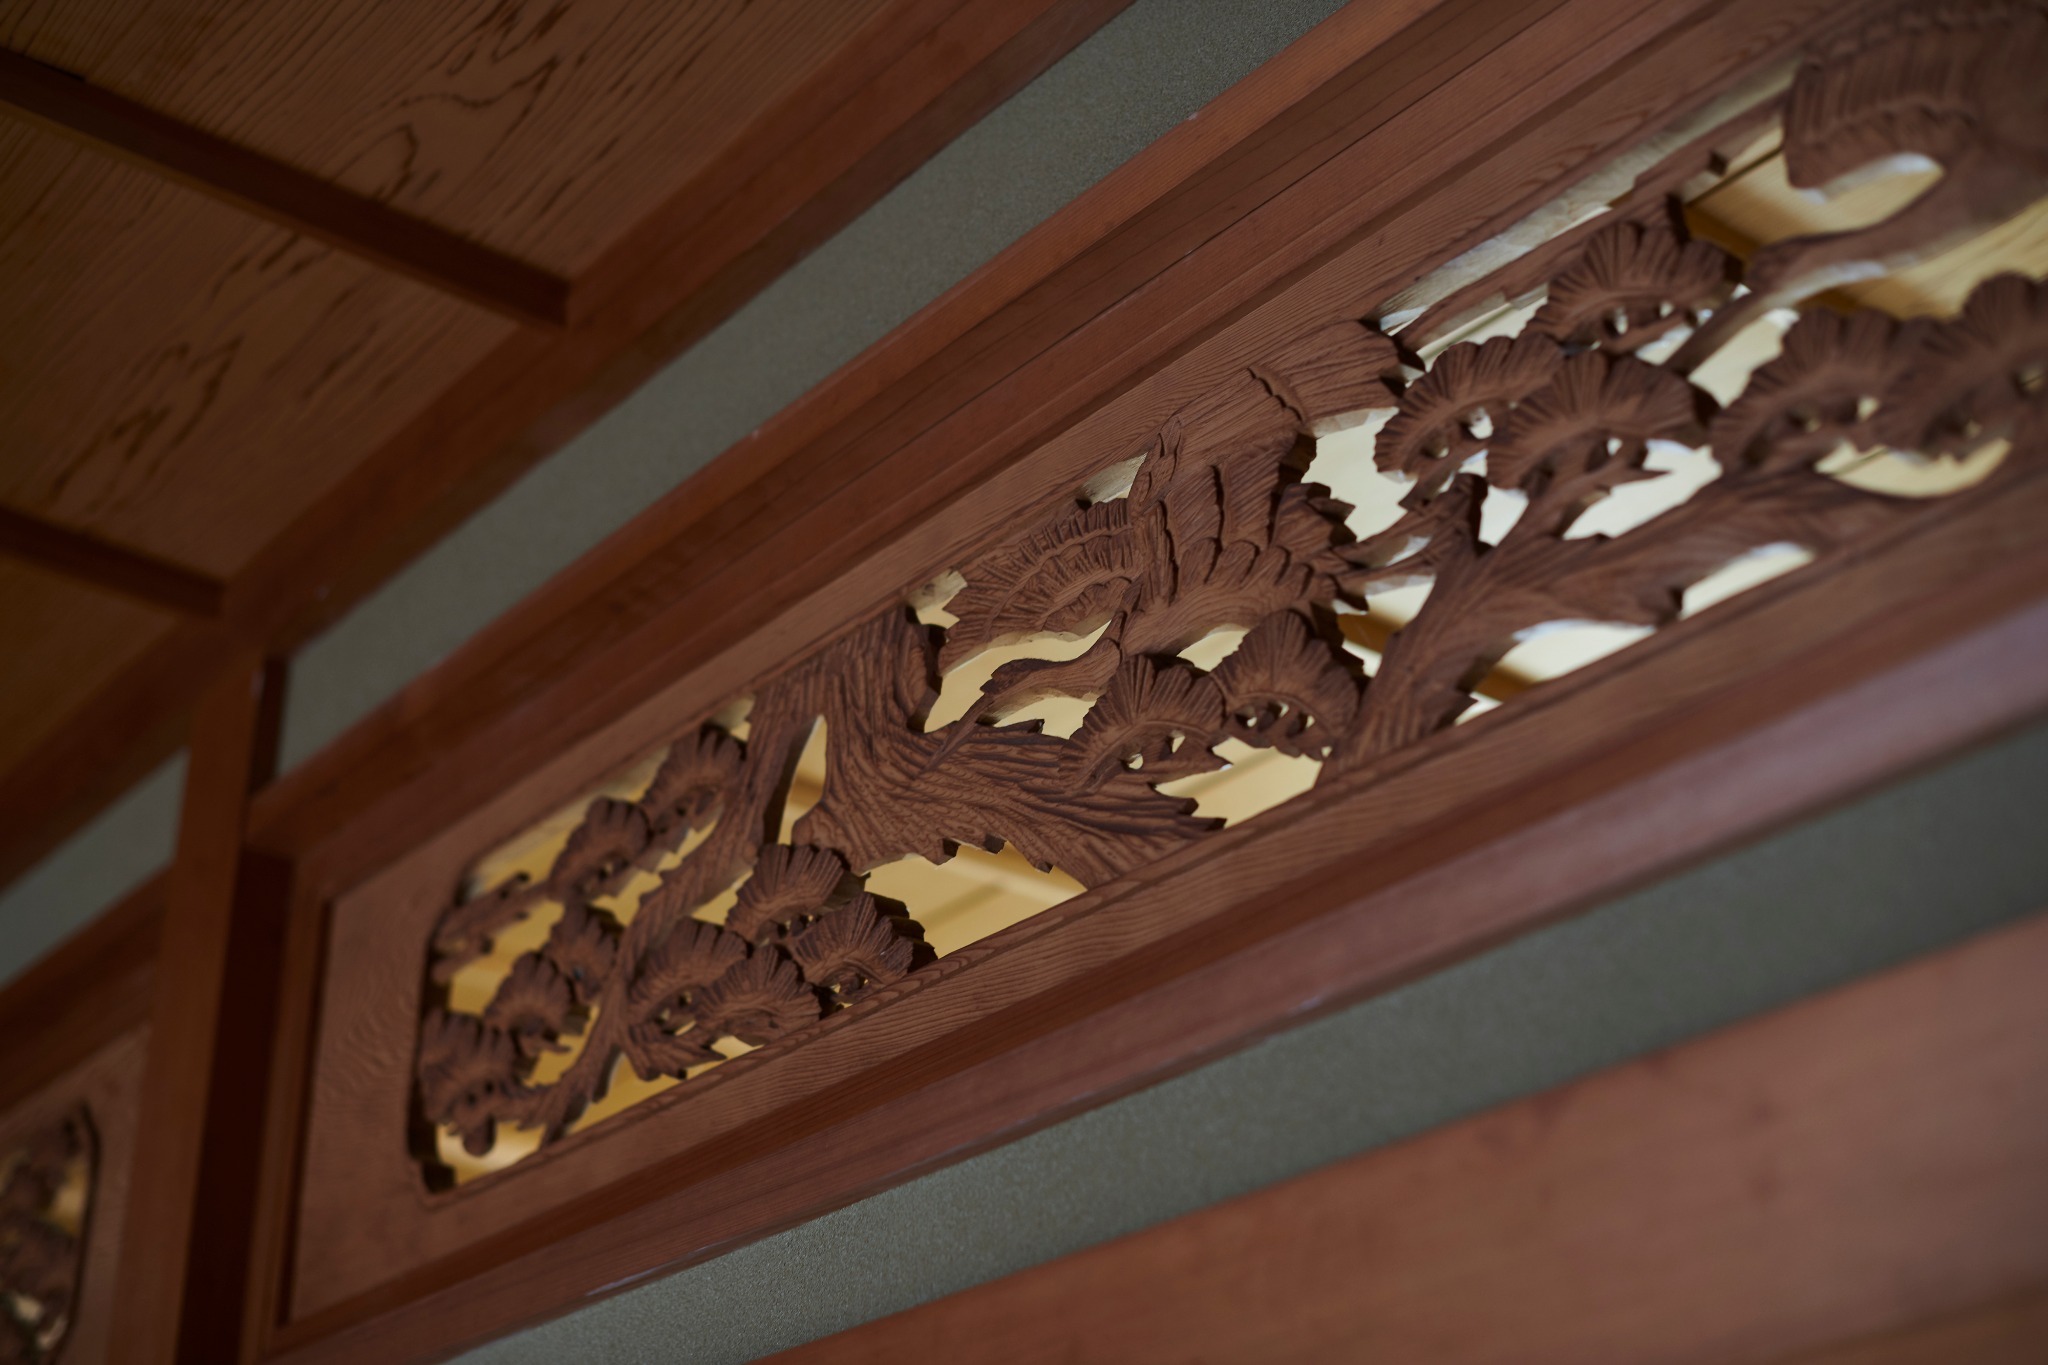 Ranma Engraving  (Japanese Crafts) ”Ranma” is an opening space that is provided between the ceiling and the paper sliding door for ventilation and daylighting.